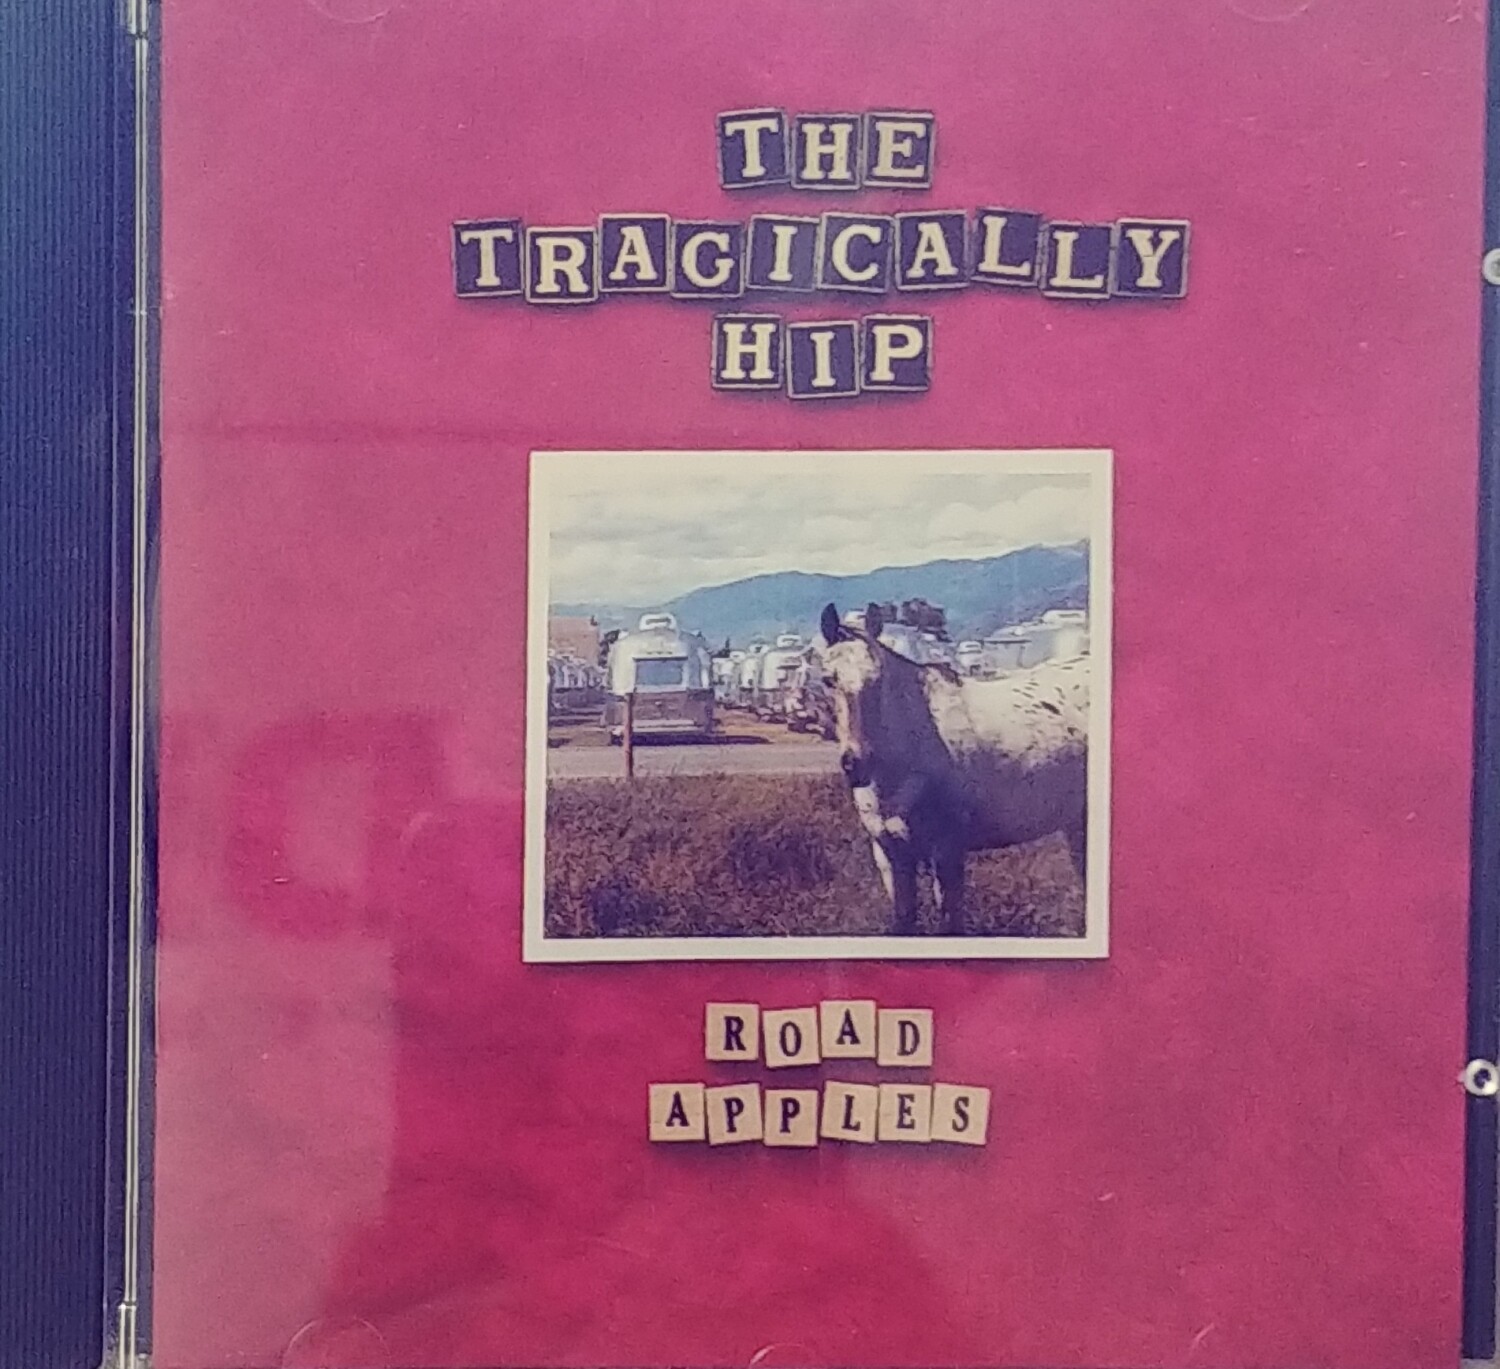 The Tragically Hip - Road Apples (CD)